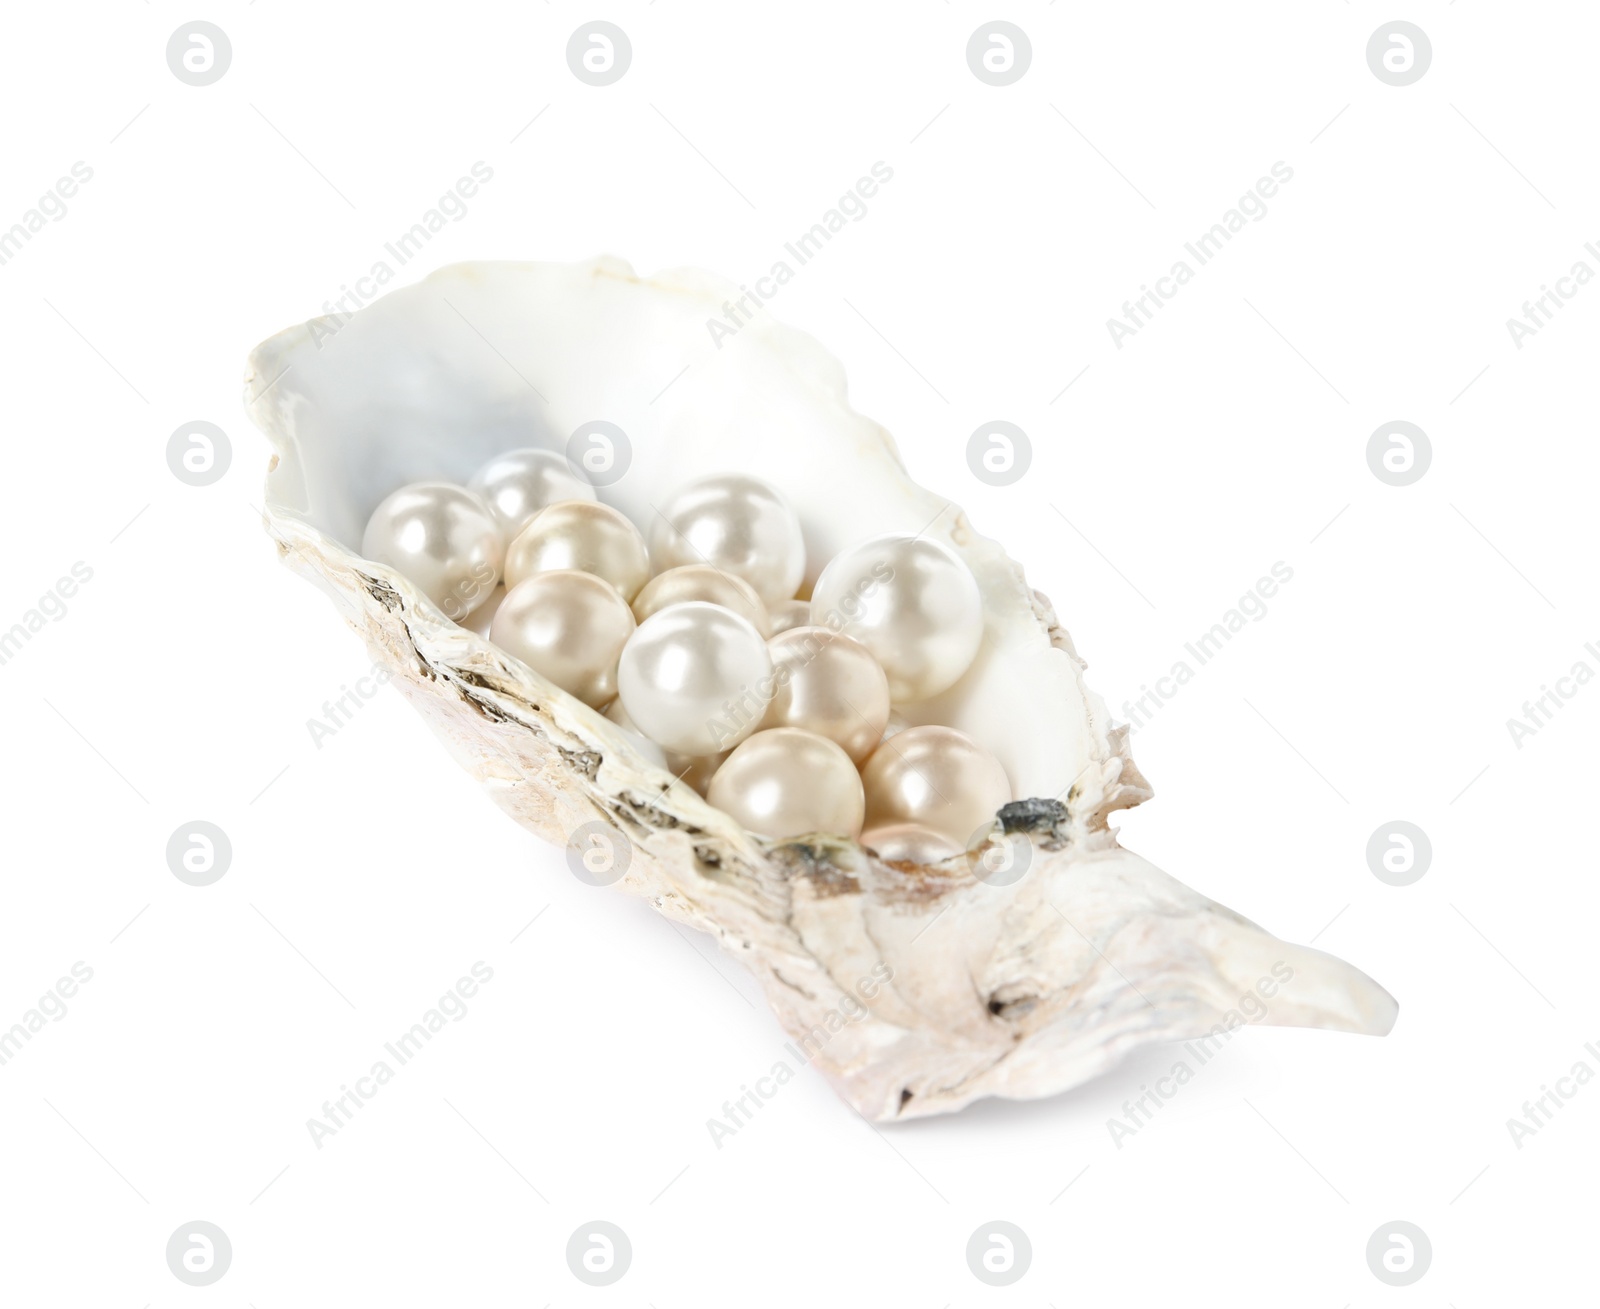 Photo of Oyster shell with different pearls on white background